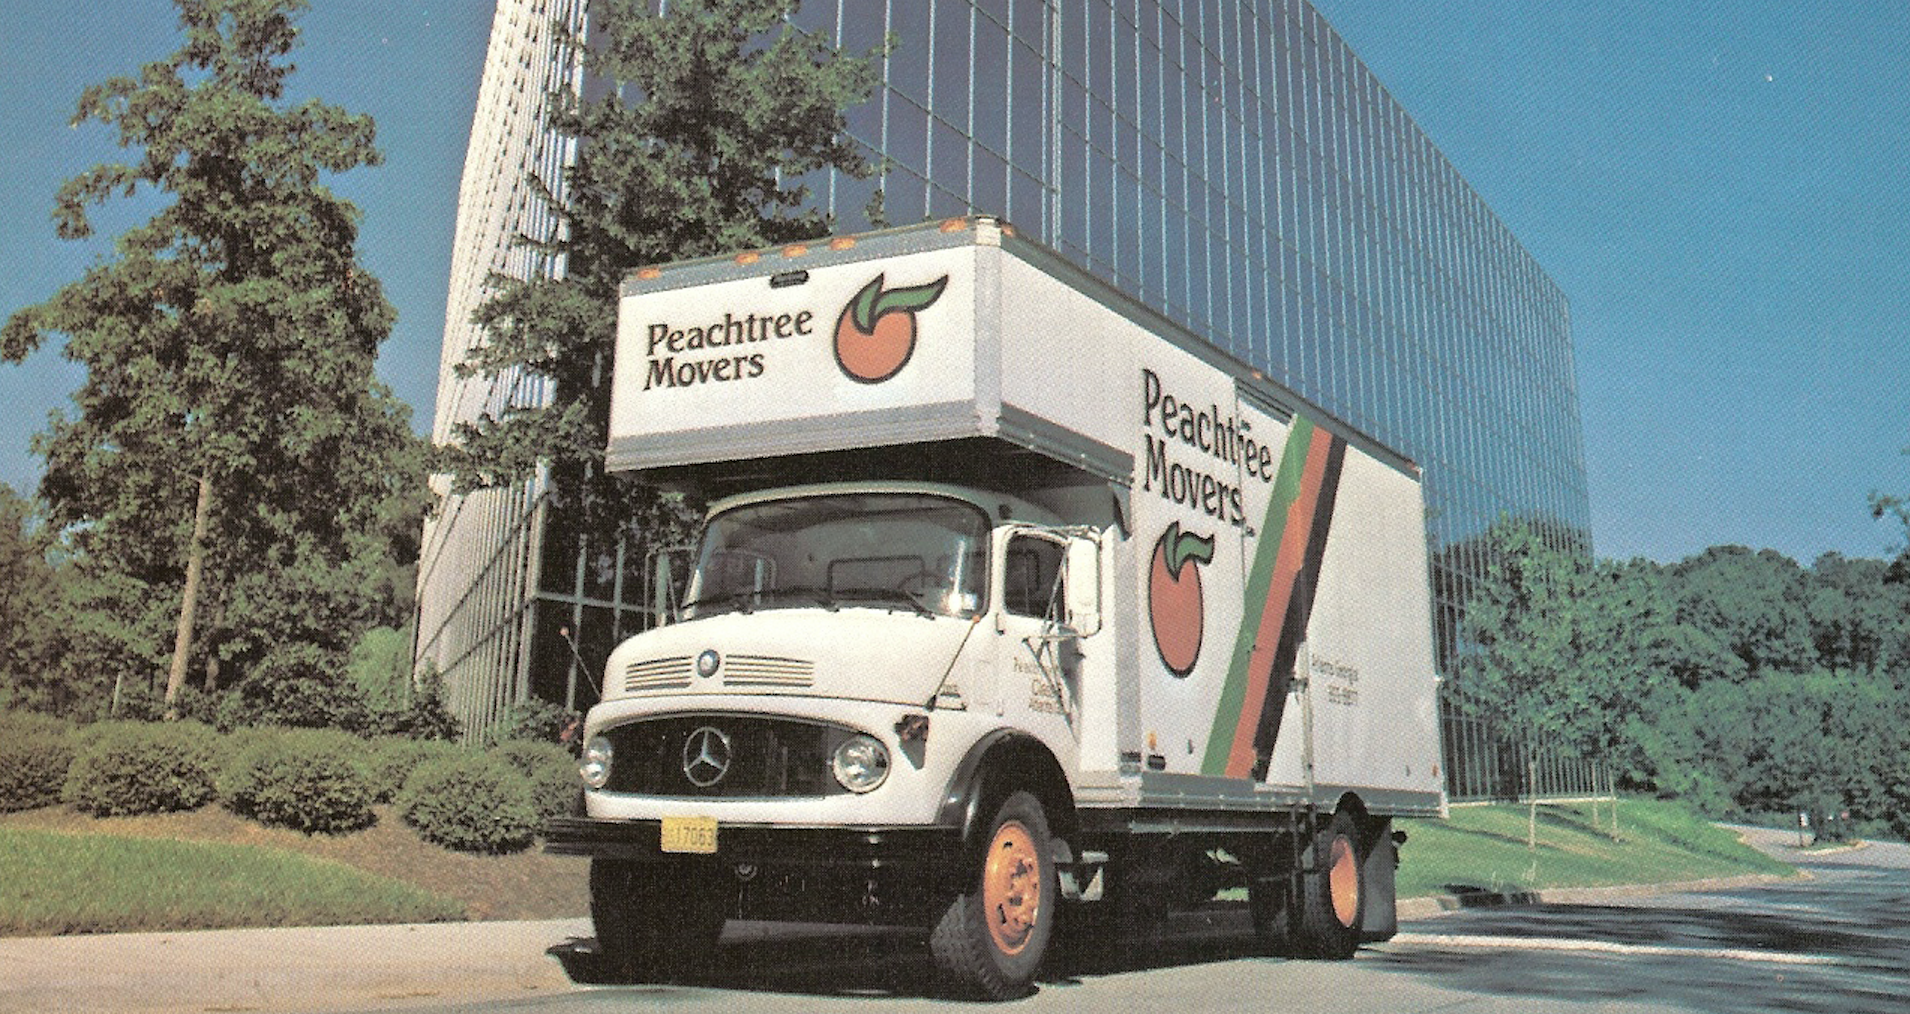 Peachtree Movers truck